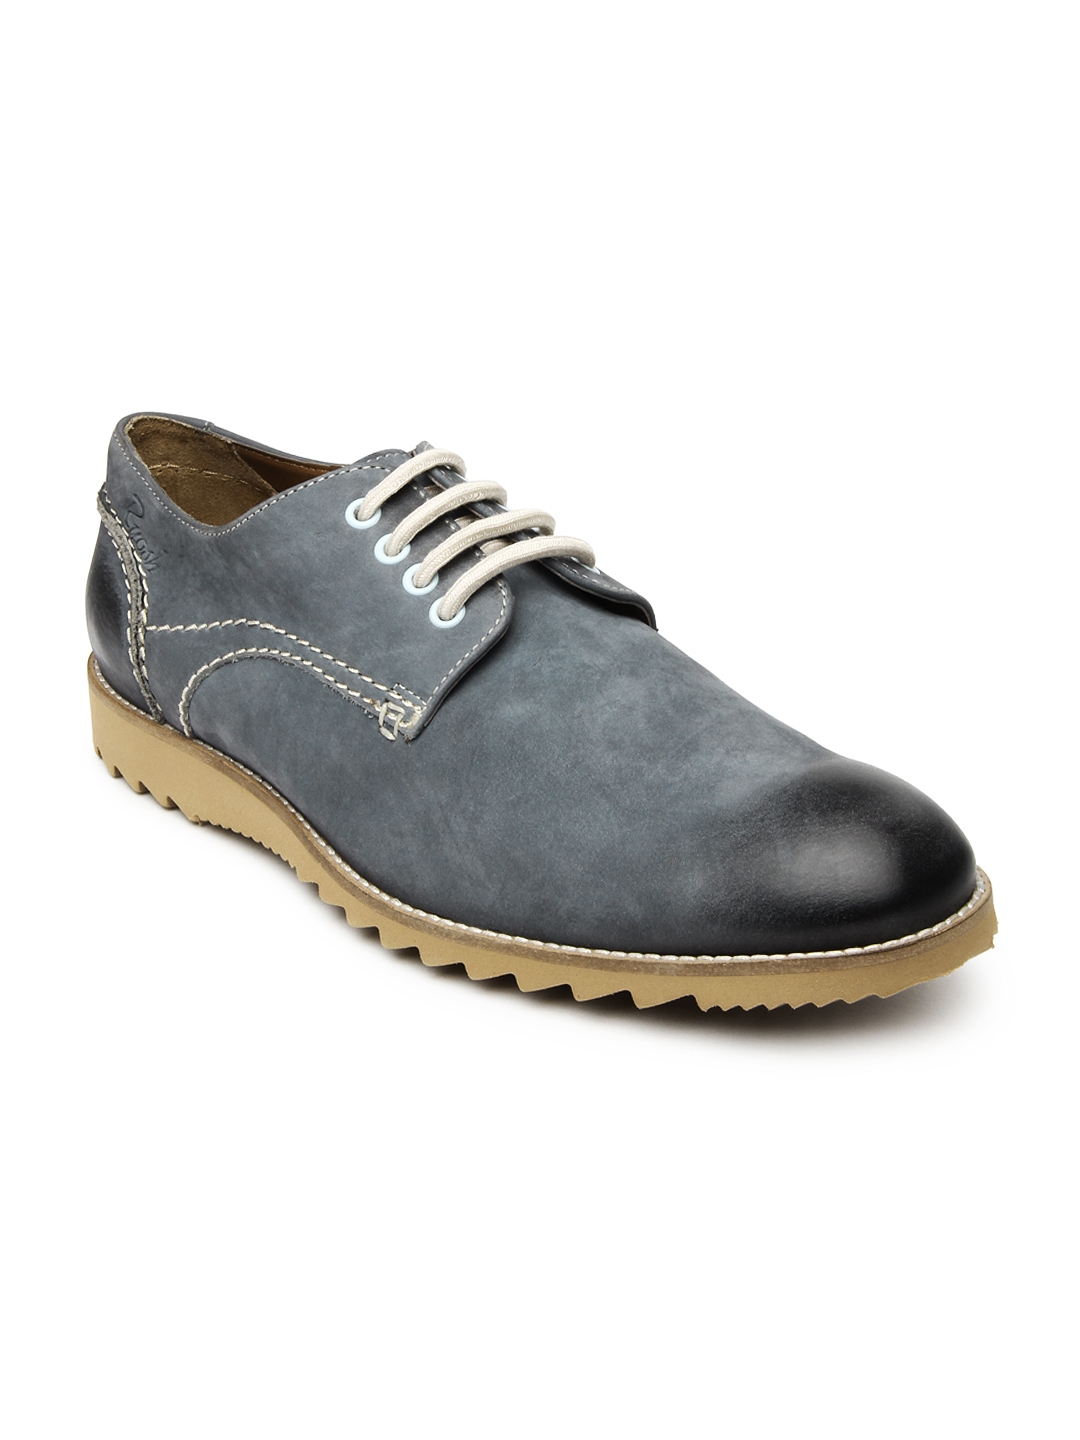 Buy Ruosh Casual Men Blue Leather Boots - Boots for Men 274846 | Myntra